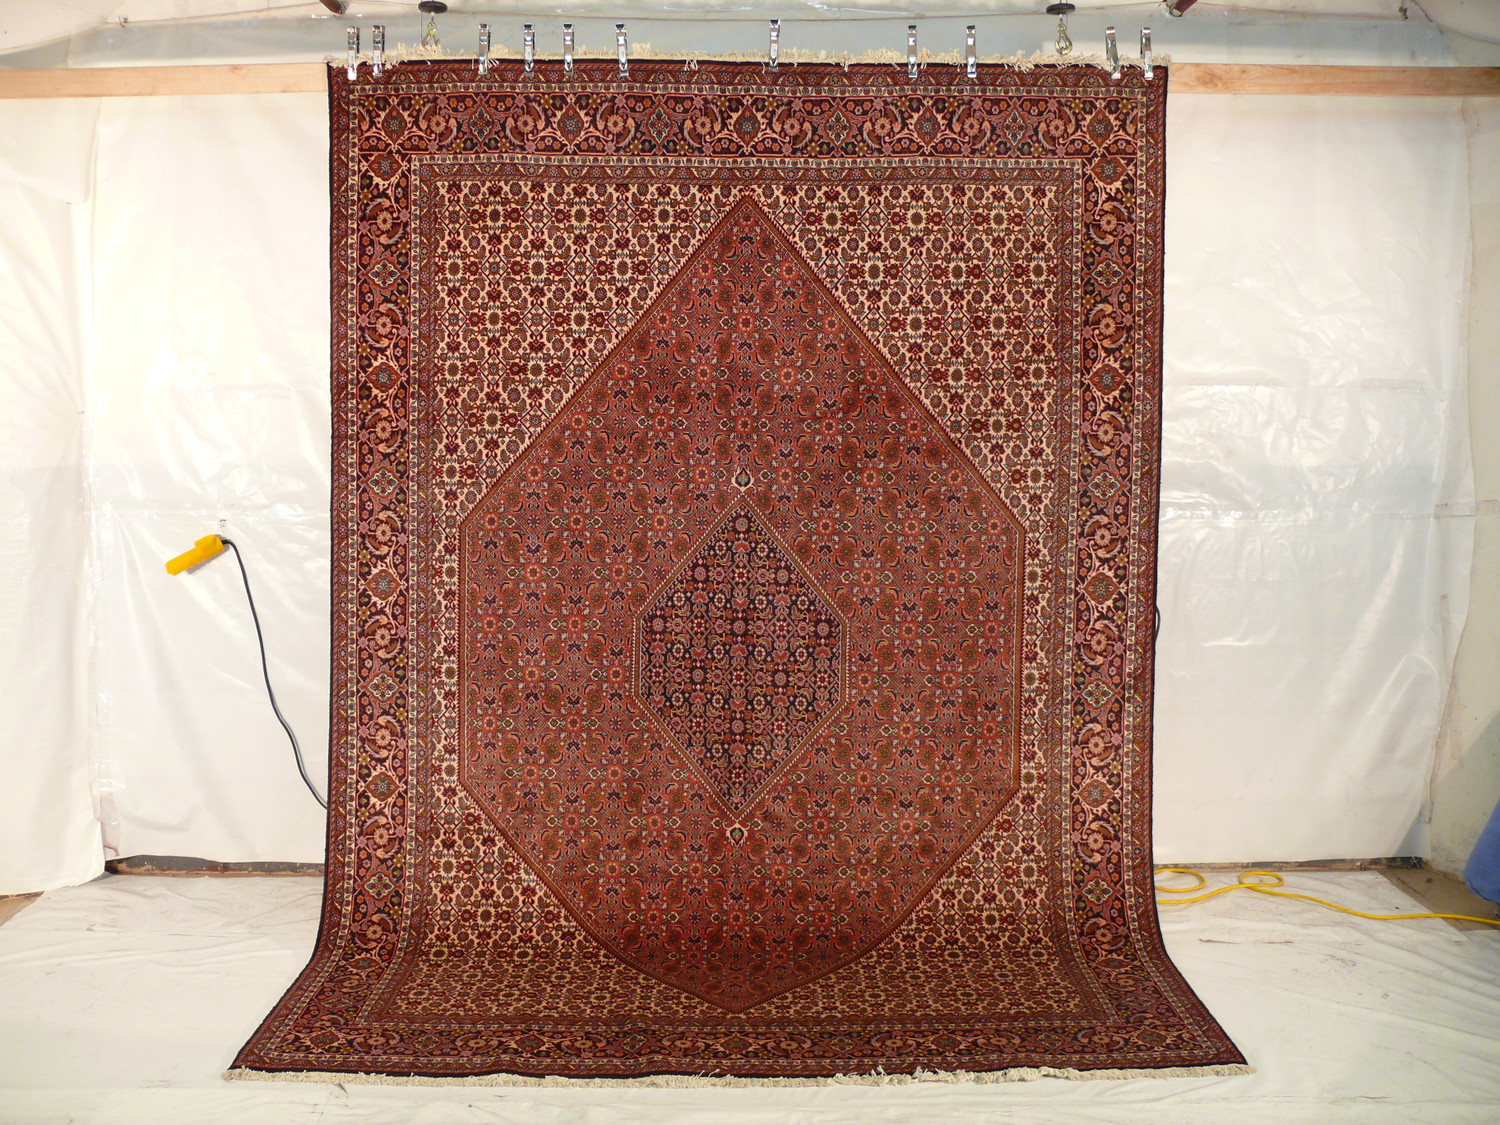 The Persian Bijar Iron Rug displayed hanging, revealing the full design with a prominent central medallion and densely patterned field, set against a white backdrop with a yellow extension cord on the floor.